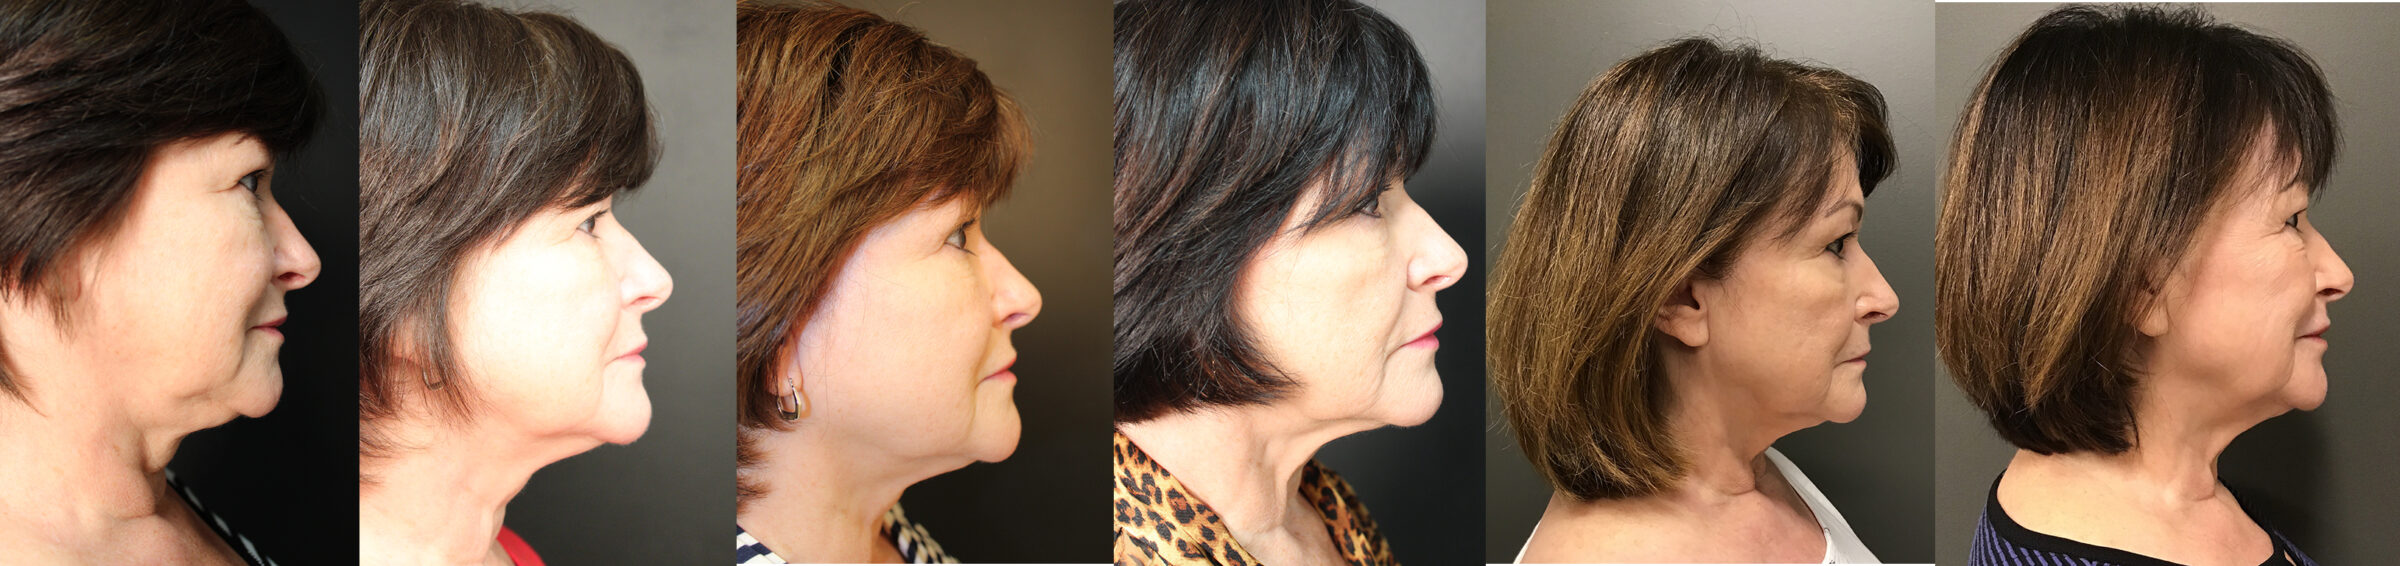 Pre Profound treatment, 3 months, 6 months, 3 years, 6 years, post single Profound Treatment This patient then decided to do a second Profound treatment and to add a CO2RE laser at that time, therefore frame # 6 is shown at 6 years post the 1st treatment, while the last frame is shown 6 weeks after the 2nd Profound plus CO2RE treatment.